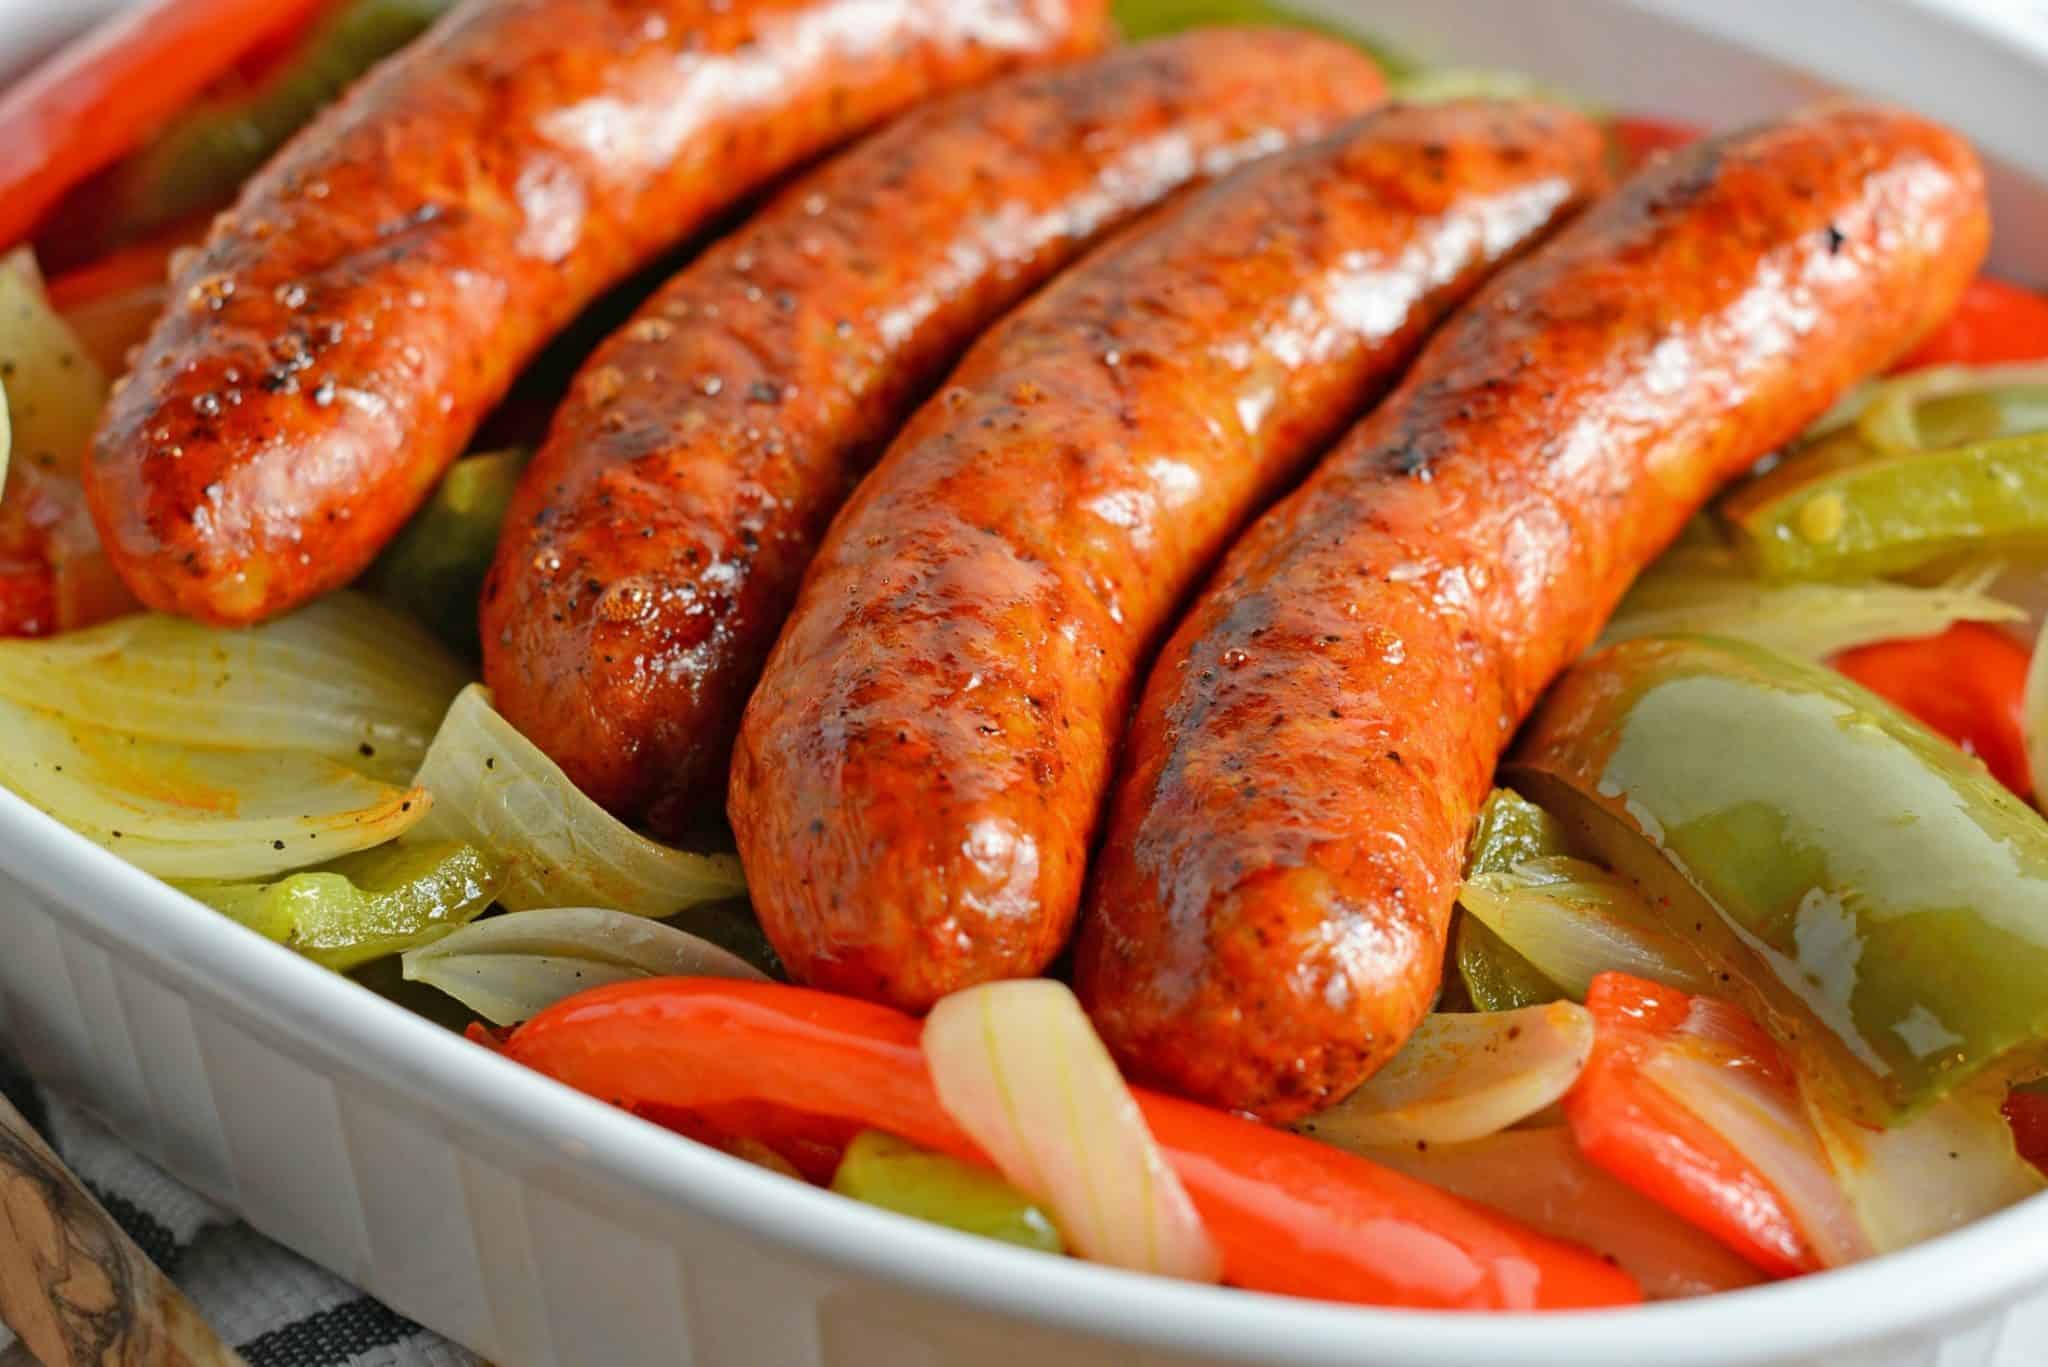 Learn how to make Homemade Italian Sausage, a fun and fulfilling process. Adjust the heat and the ingredients for a custom blend every time!